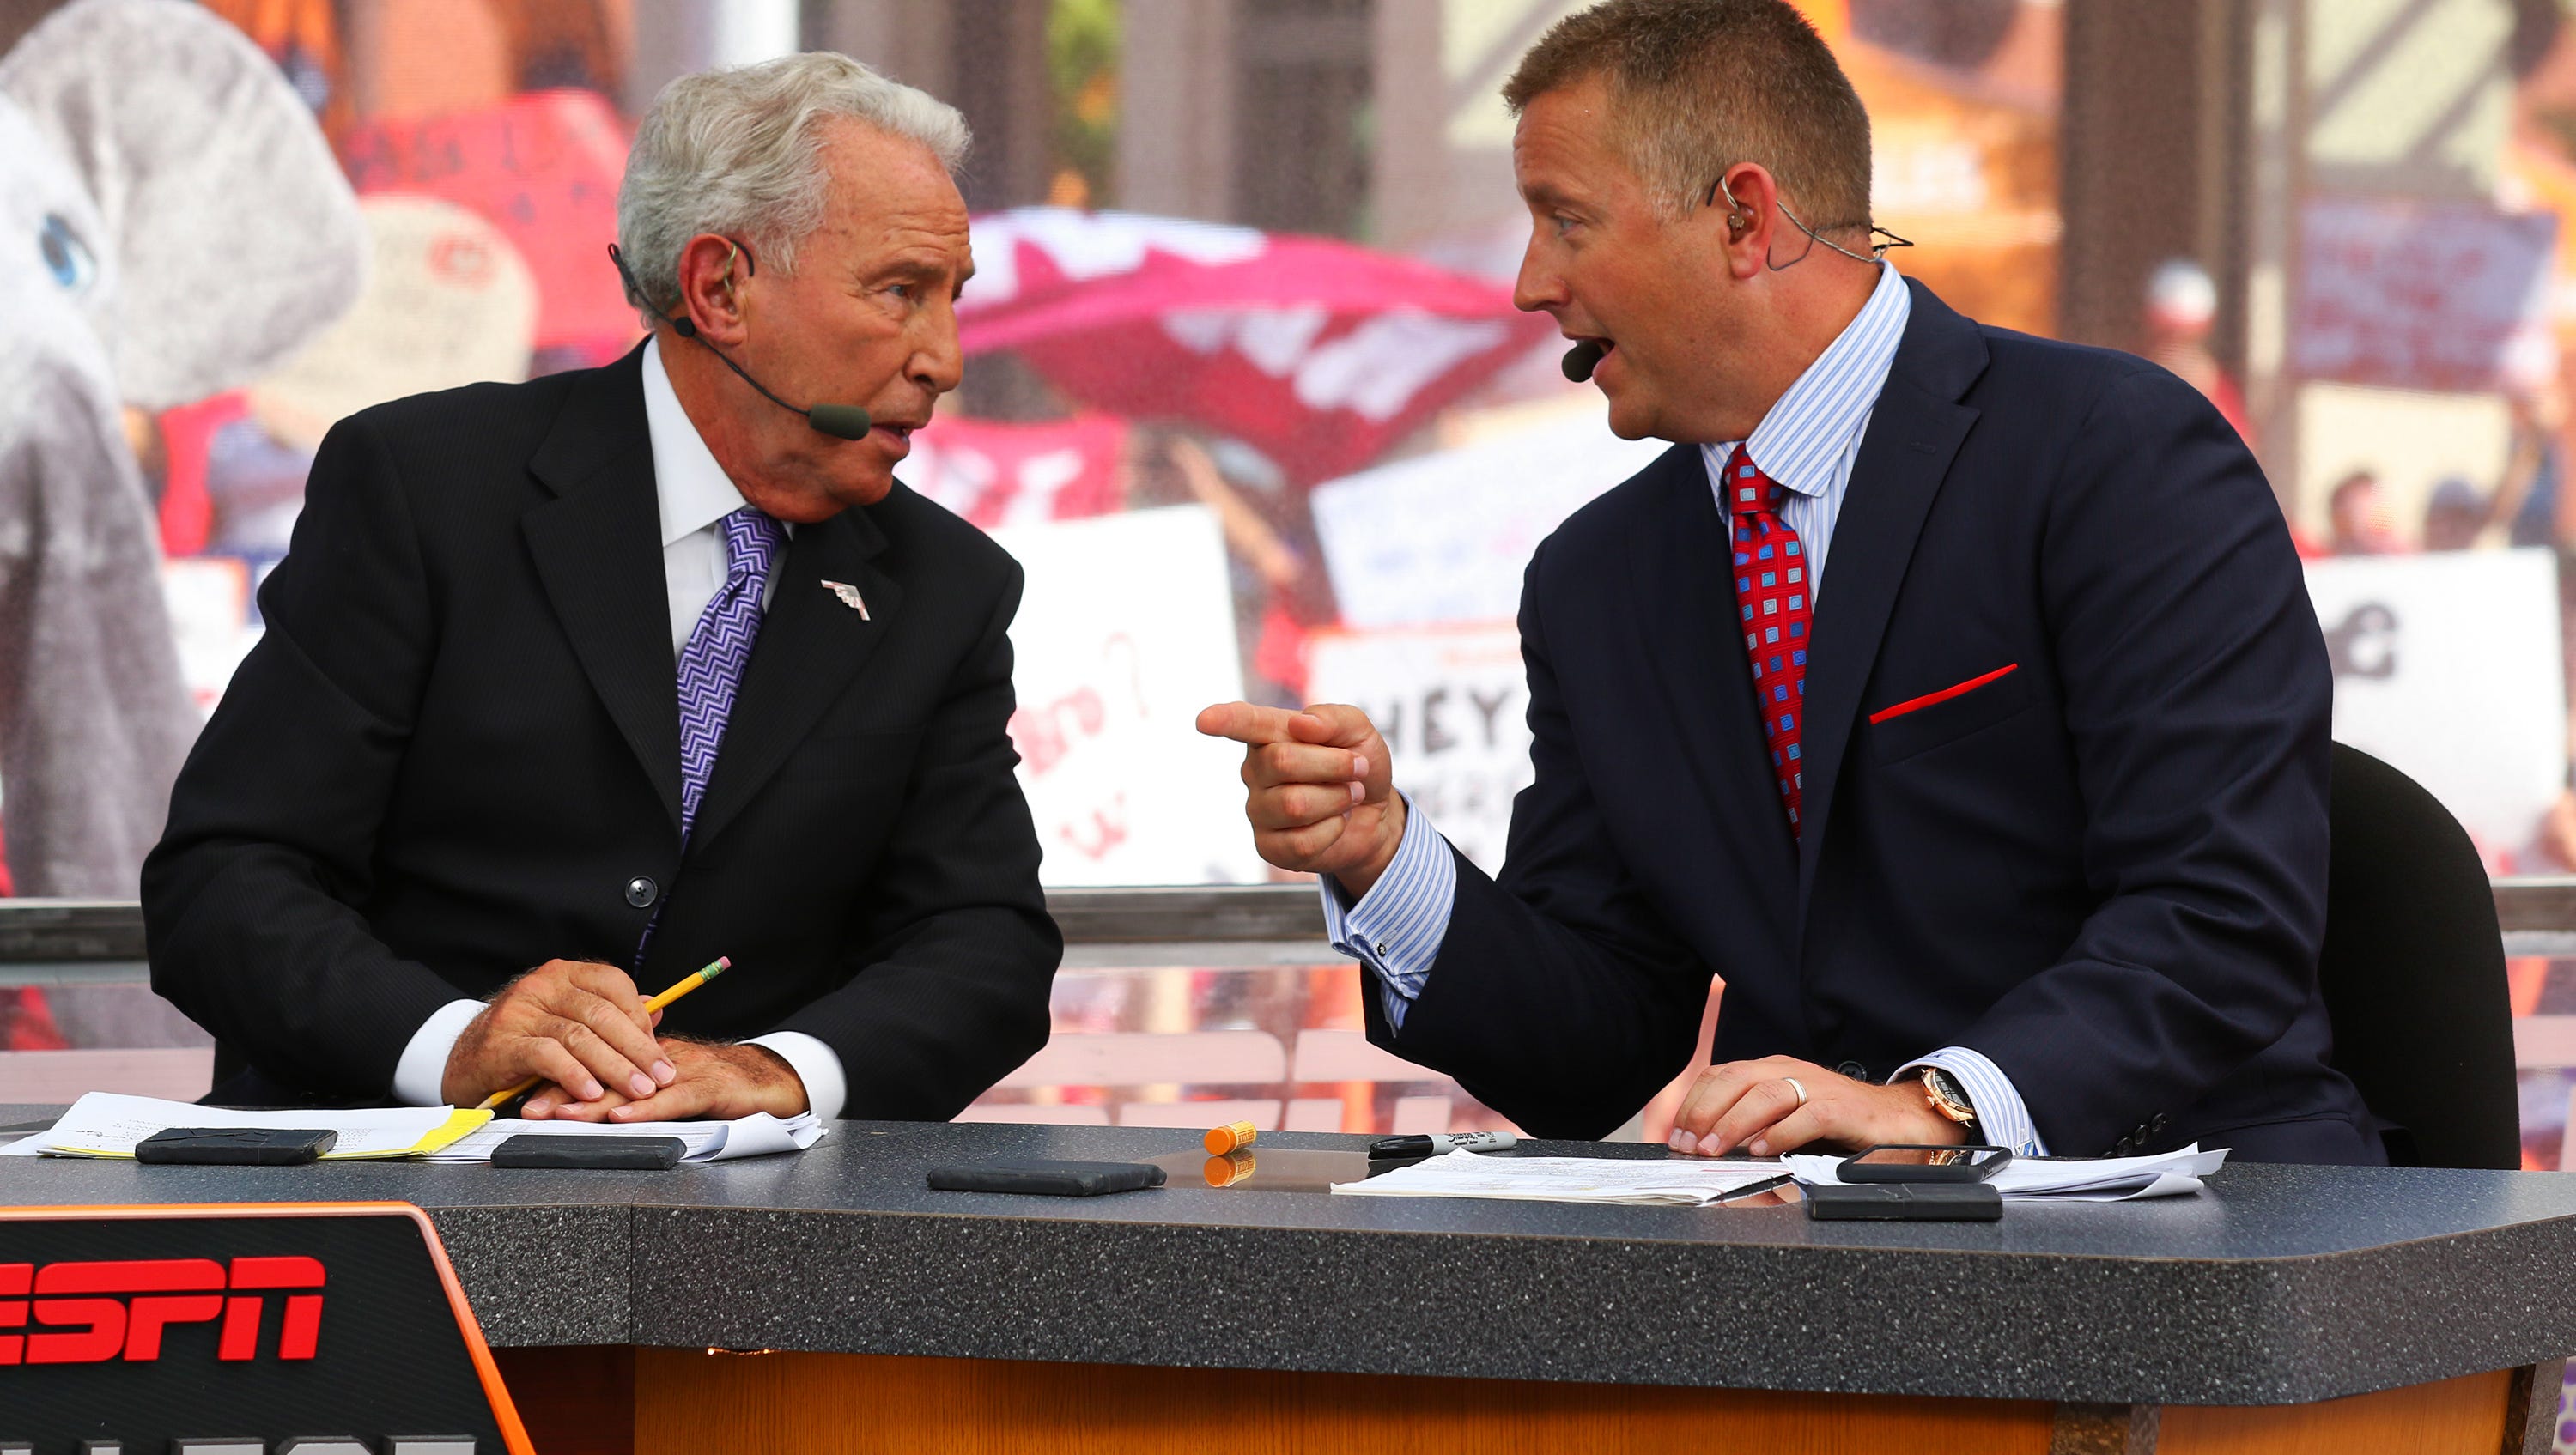 ESPN College GameDay at Penn State: Corso picks the Nittany Lions